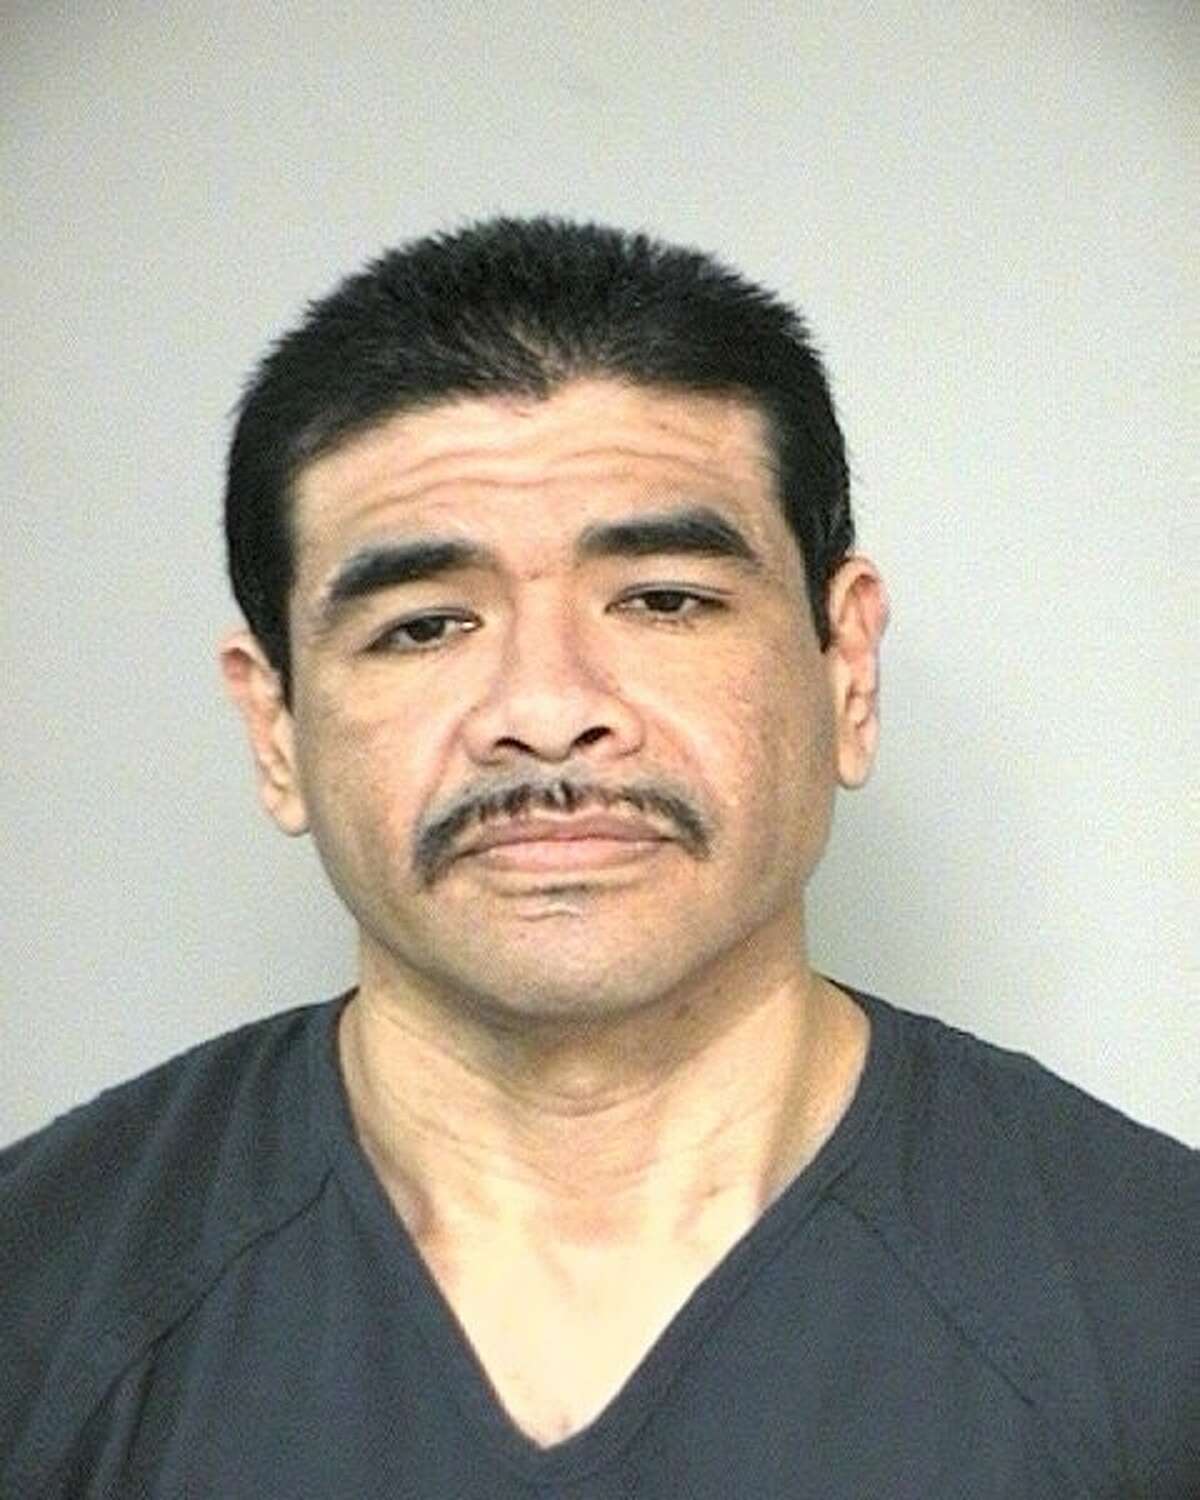 Montalvo was sentenced to 30 years in prison for the 2004 Murder of Vivian Michelle Moreno.